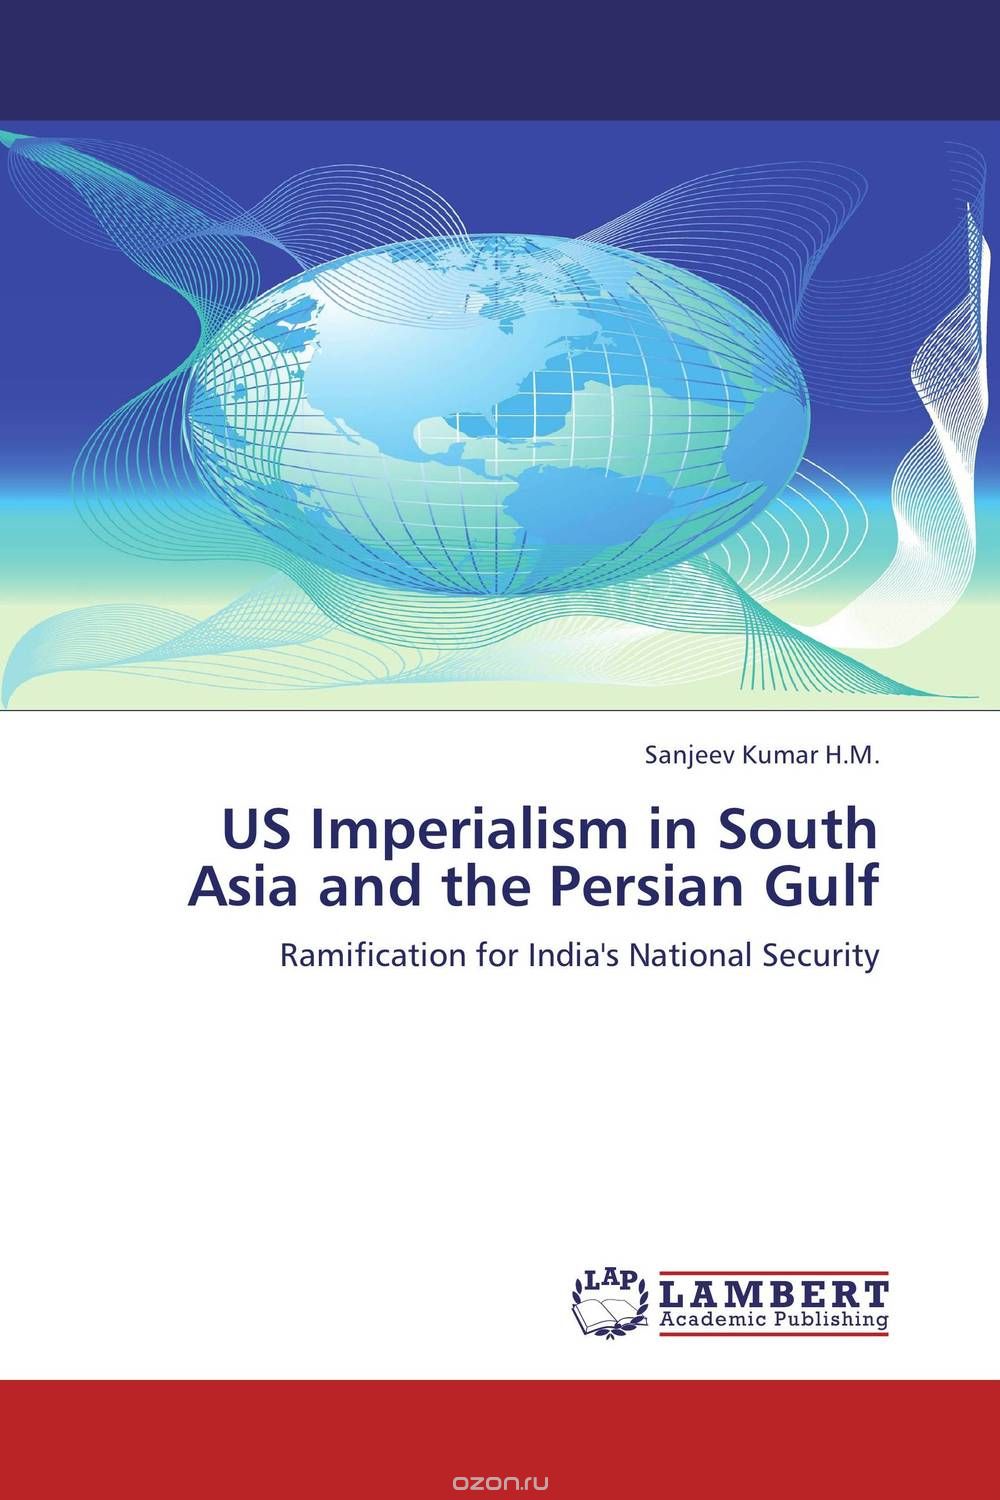 Скачать книгу "US Imperialism in South Asia and the Persian Gulf"